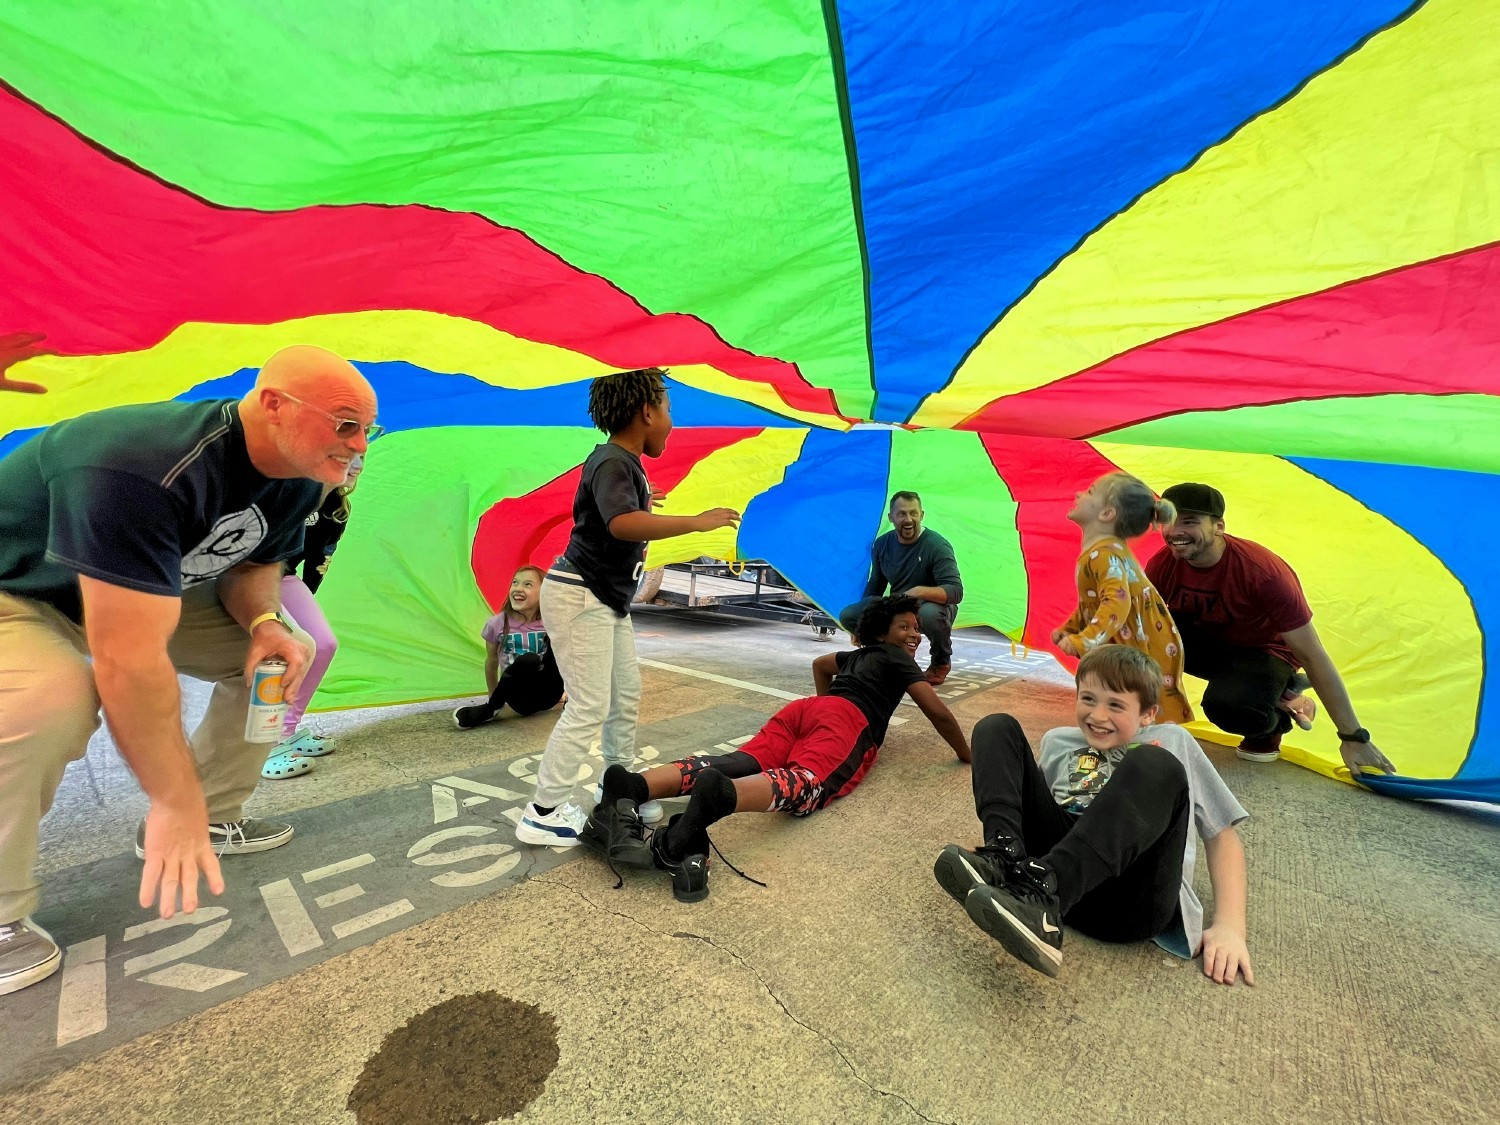 ACC's CEO, Richie Deason, participating in the parachute play with the kids.